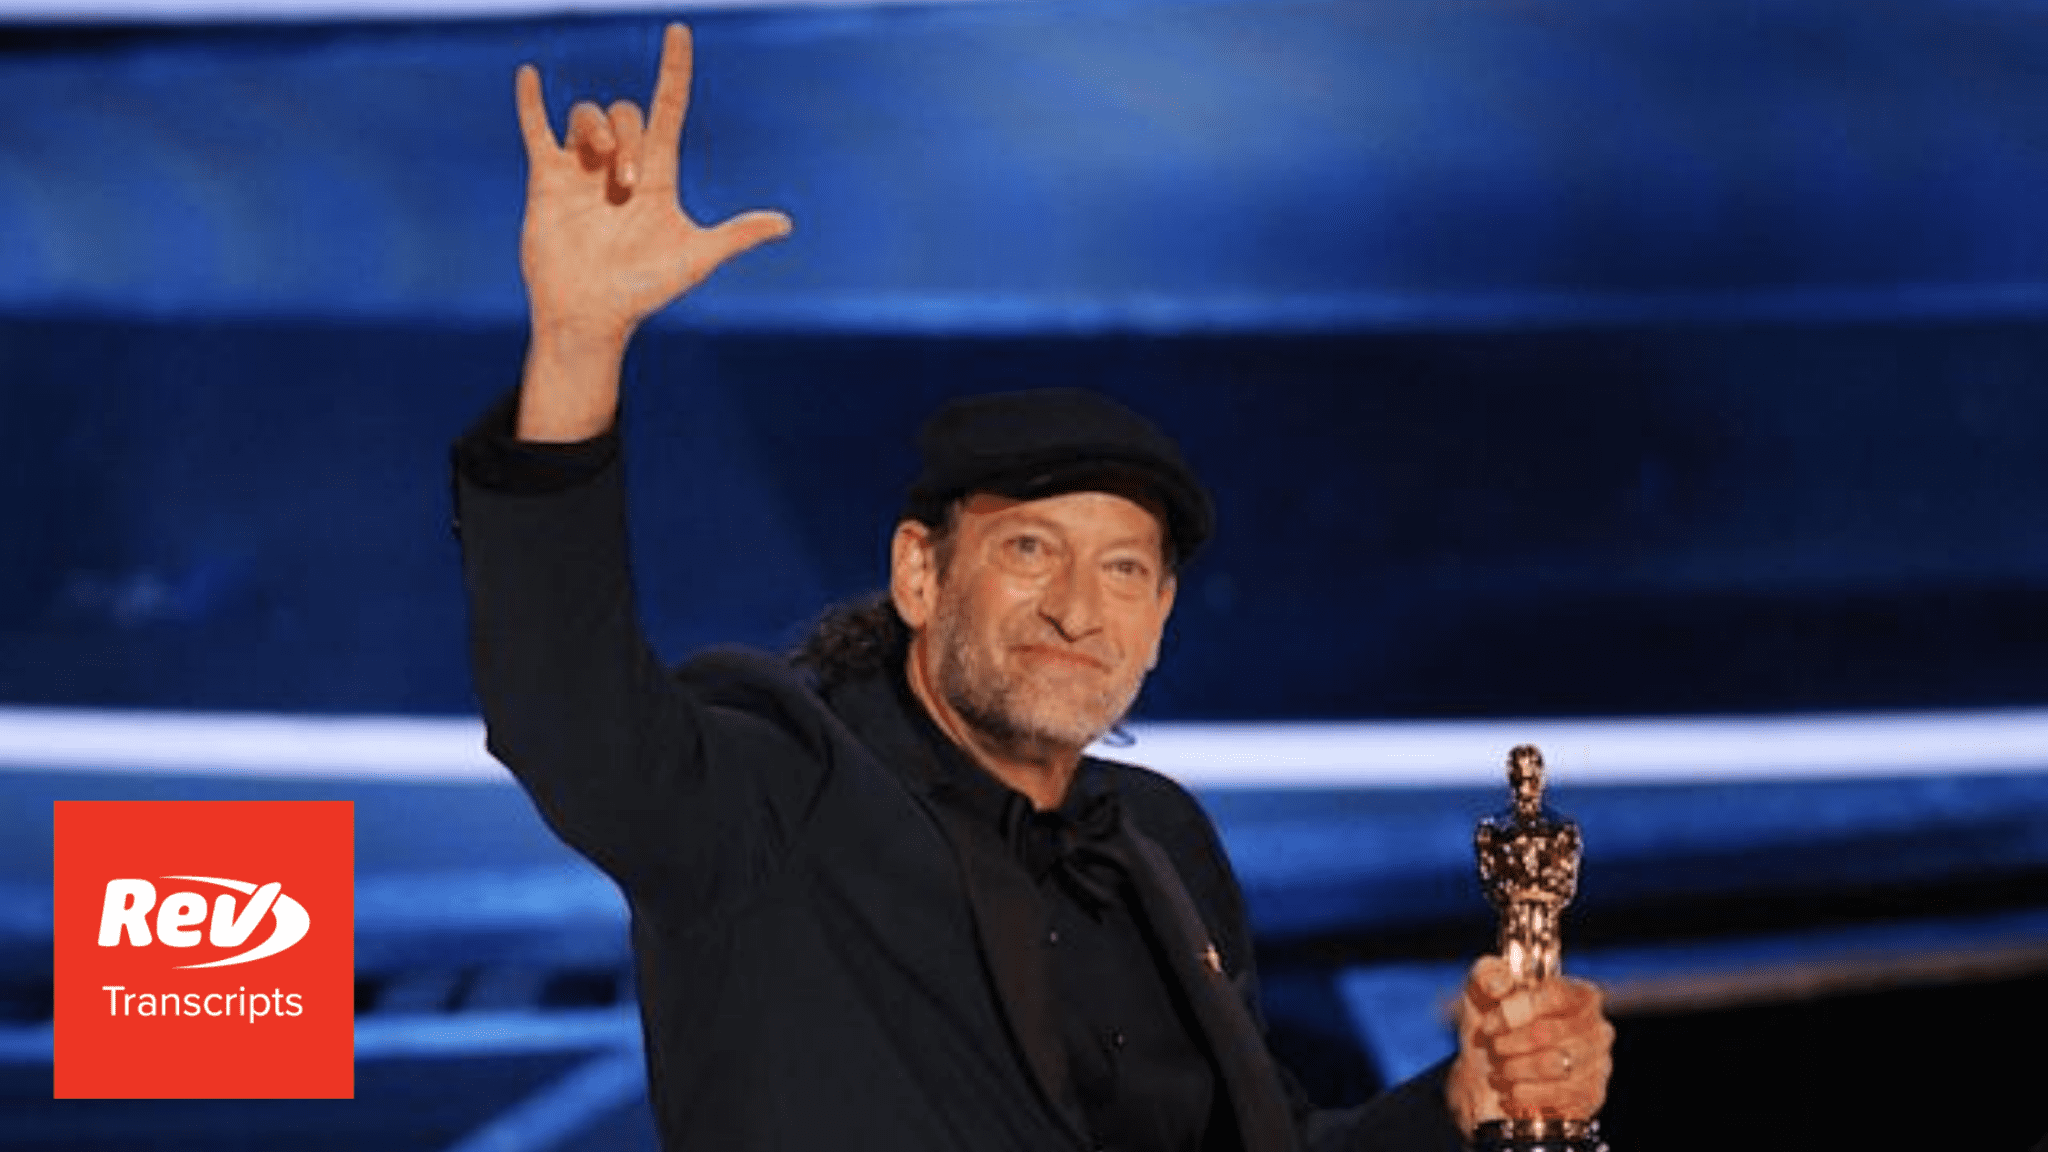 Troy Kotsur Accepts the Oscar for Supporting Actor